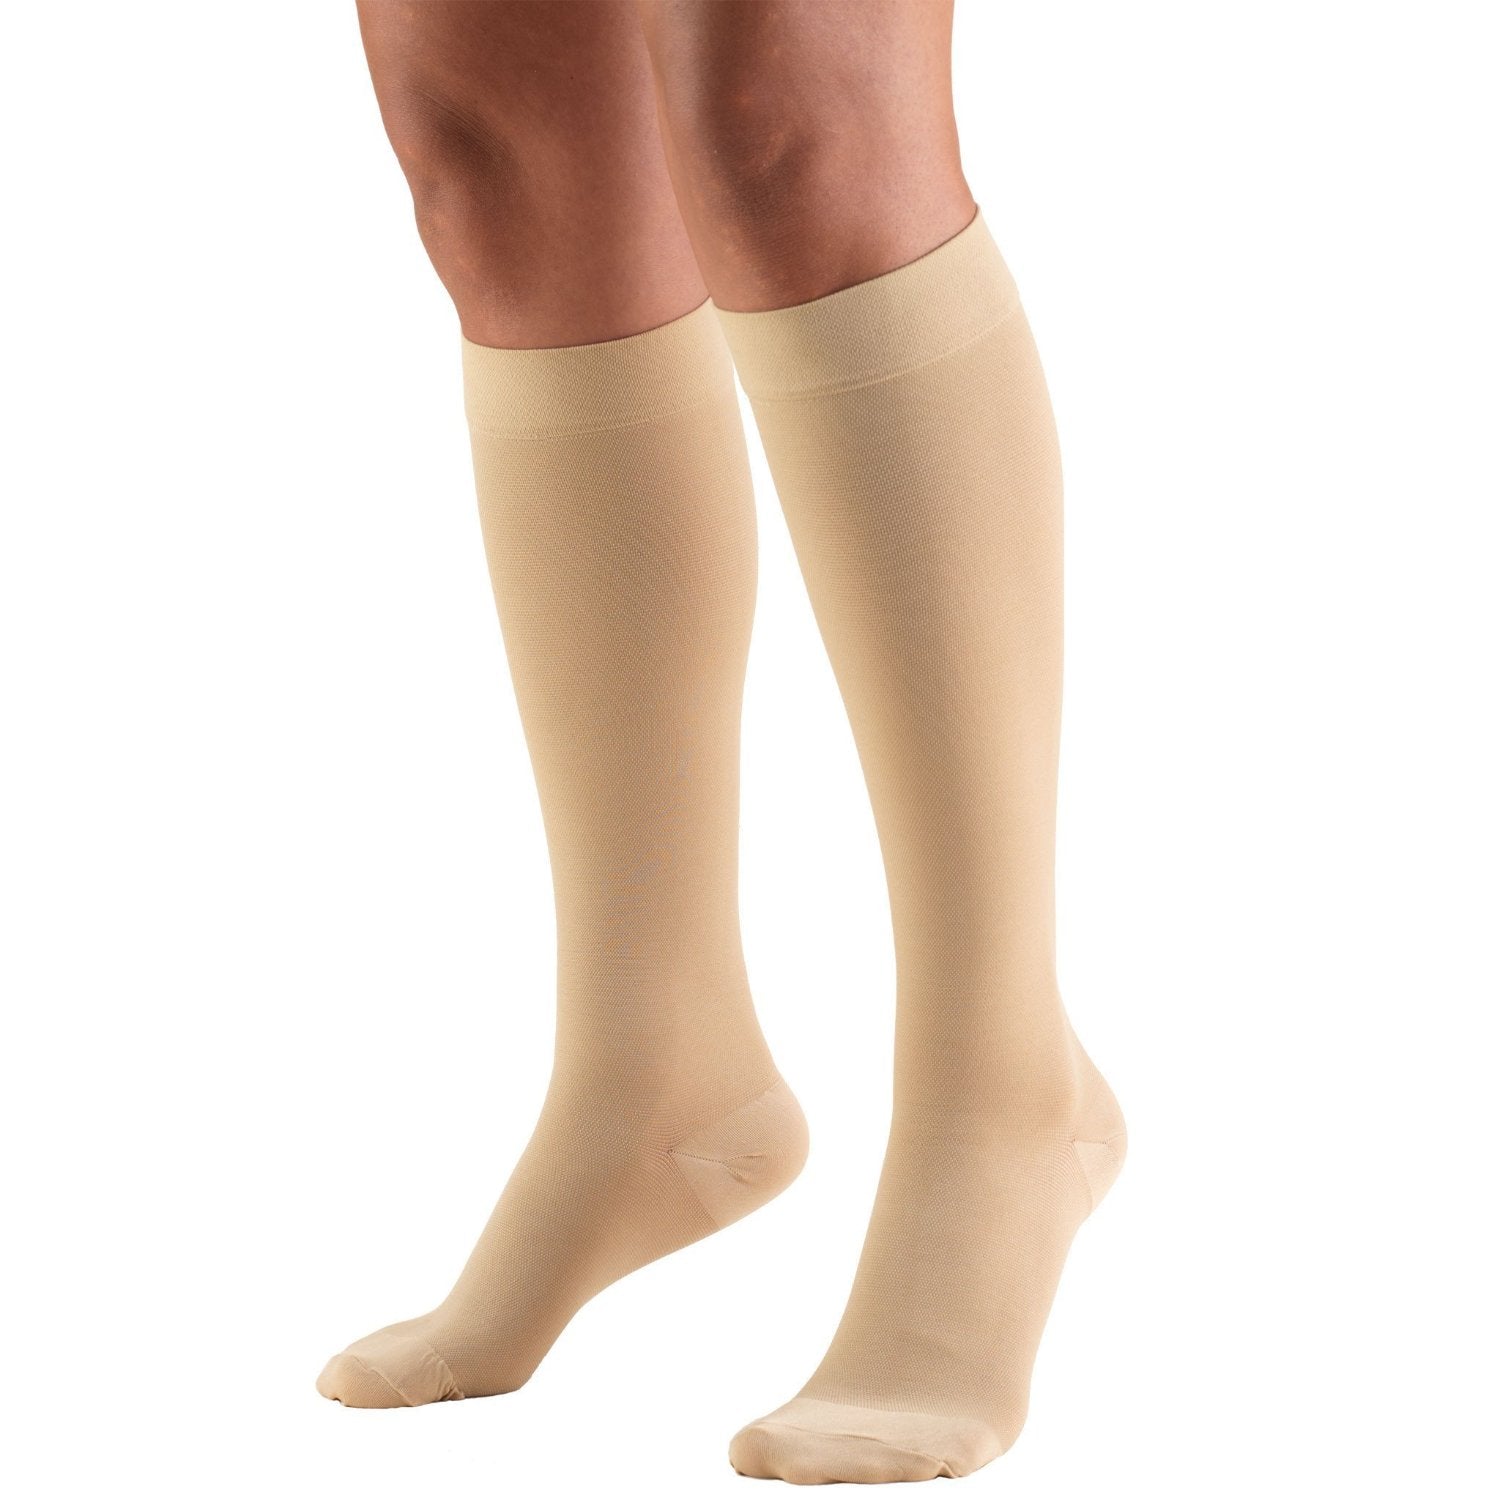 Truform Below Knee Stockings 8875 Moderate 15-20 mmH-Beige - Midwest DME Supply